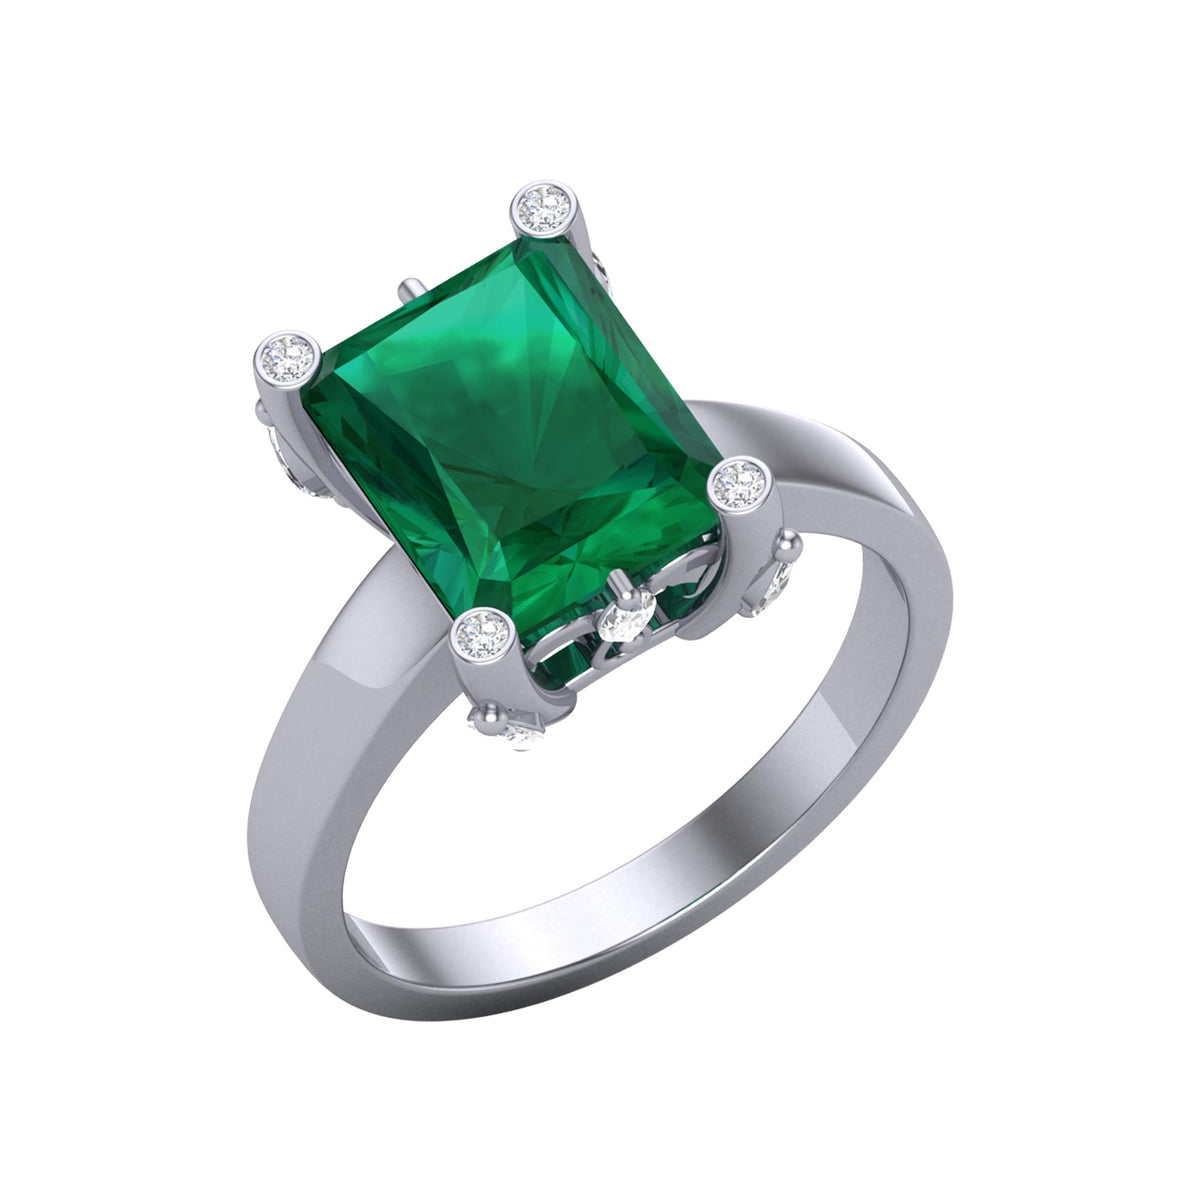 Green Tourmaline Solitaire Wedding Band Ring in Platinum Plated Sterling  Silver - 3634748 - TJC